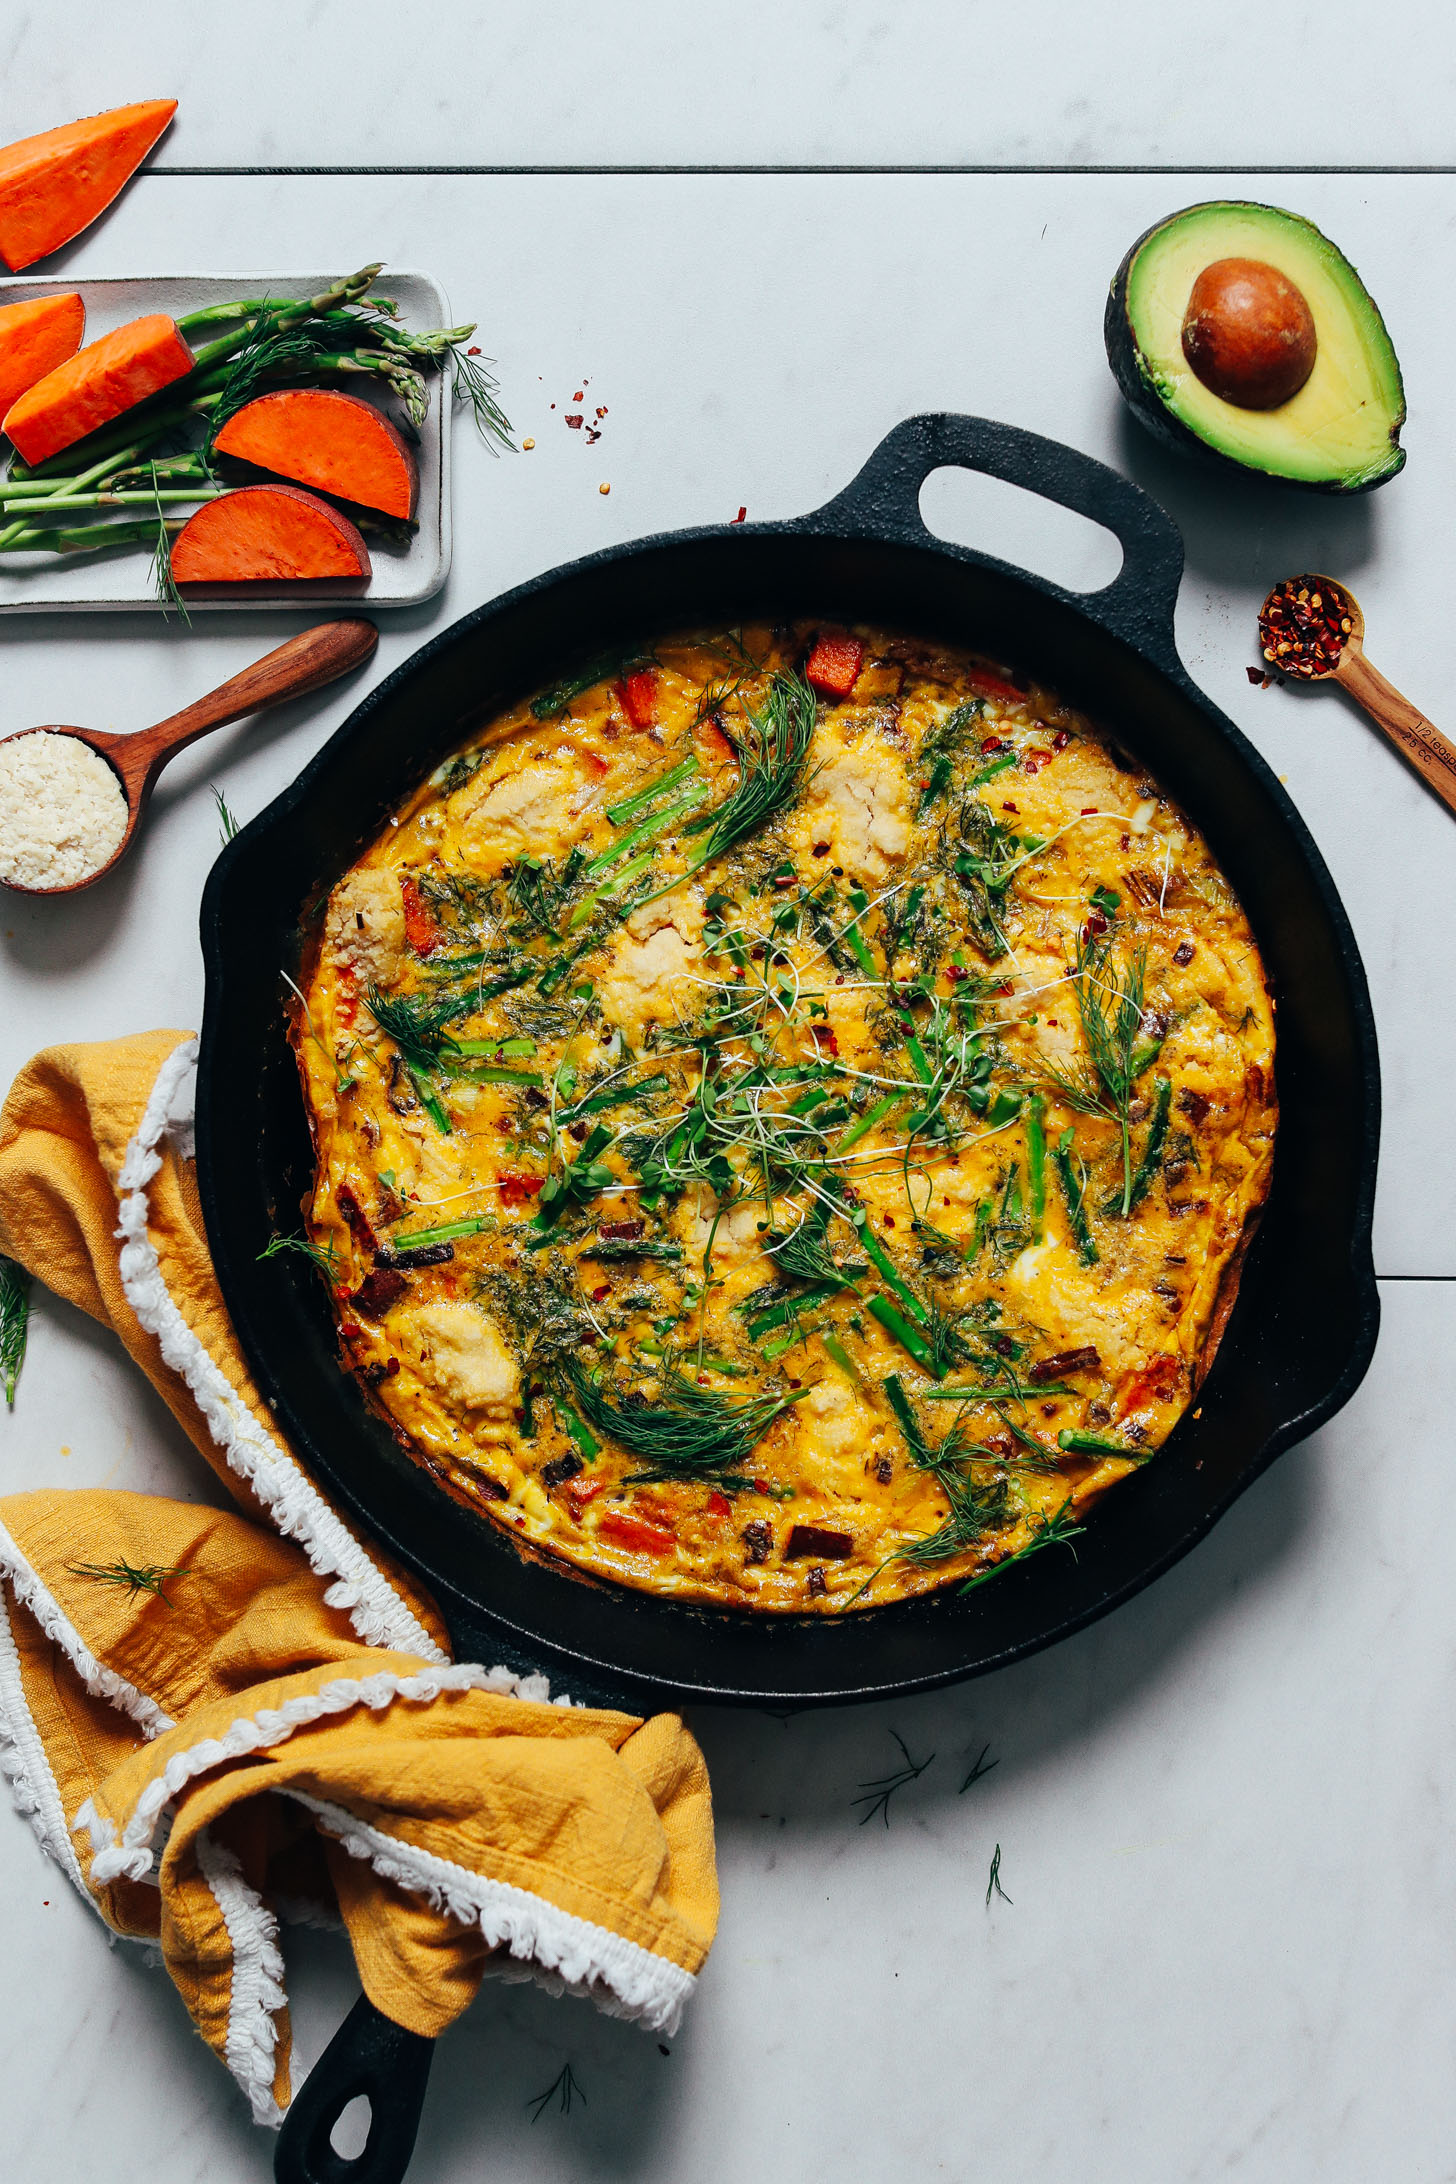 Cast iron skillet of our Spring Frittata made with Leeks, Asparagus, and Sweet Potato